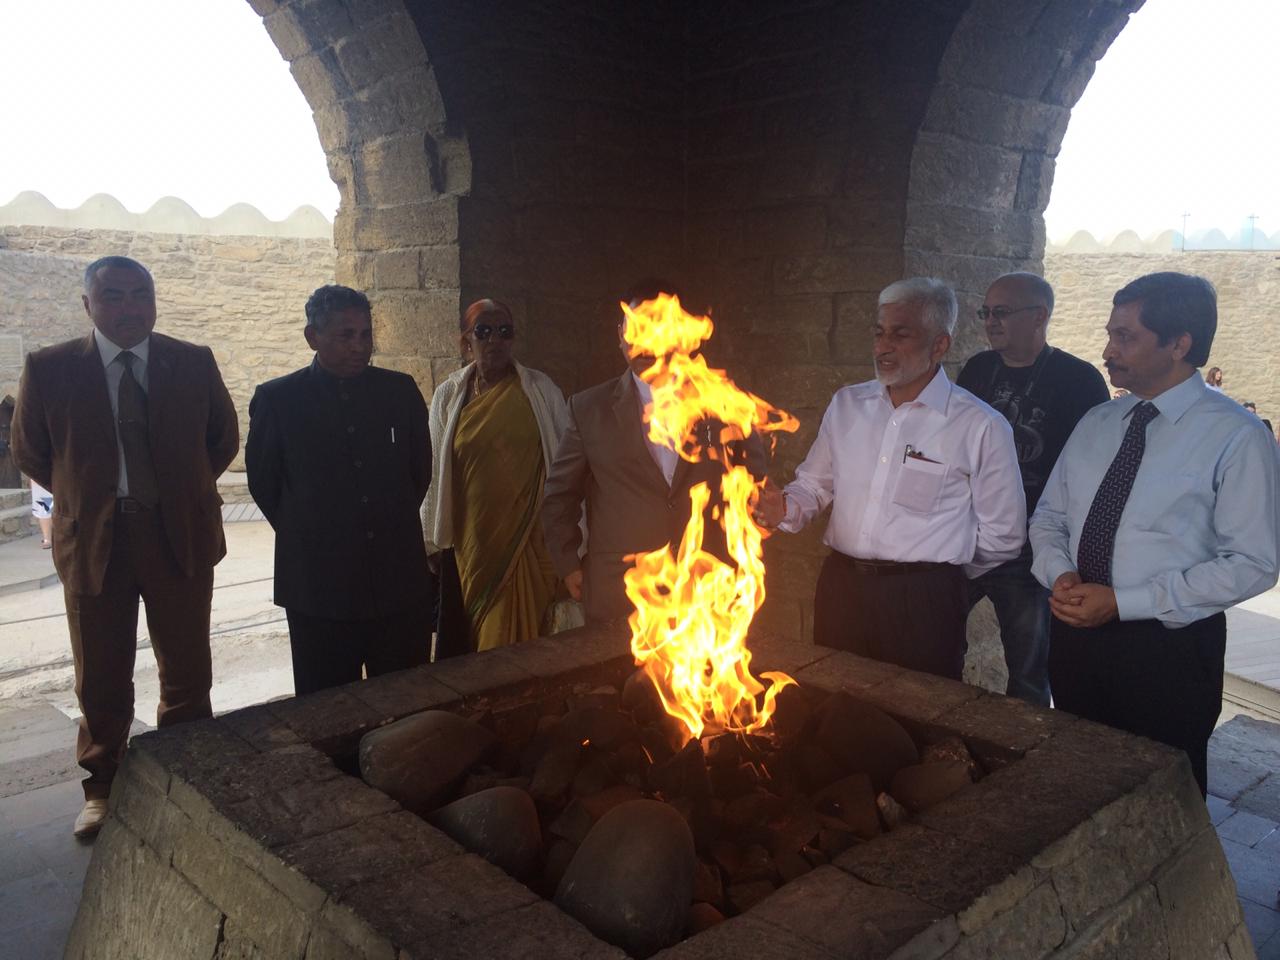 I along with two of my parliamentarian colleagues visited The Baku Ateshgah...